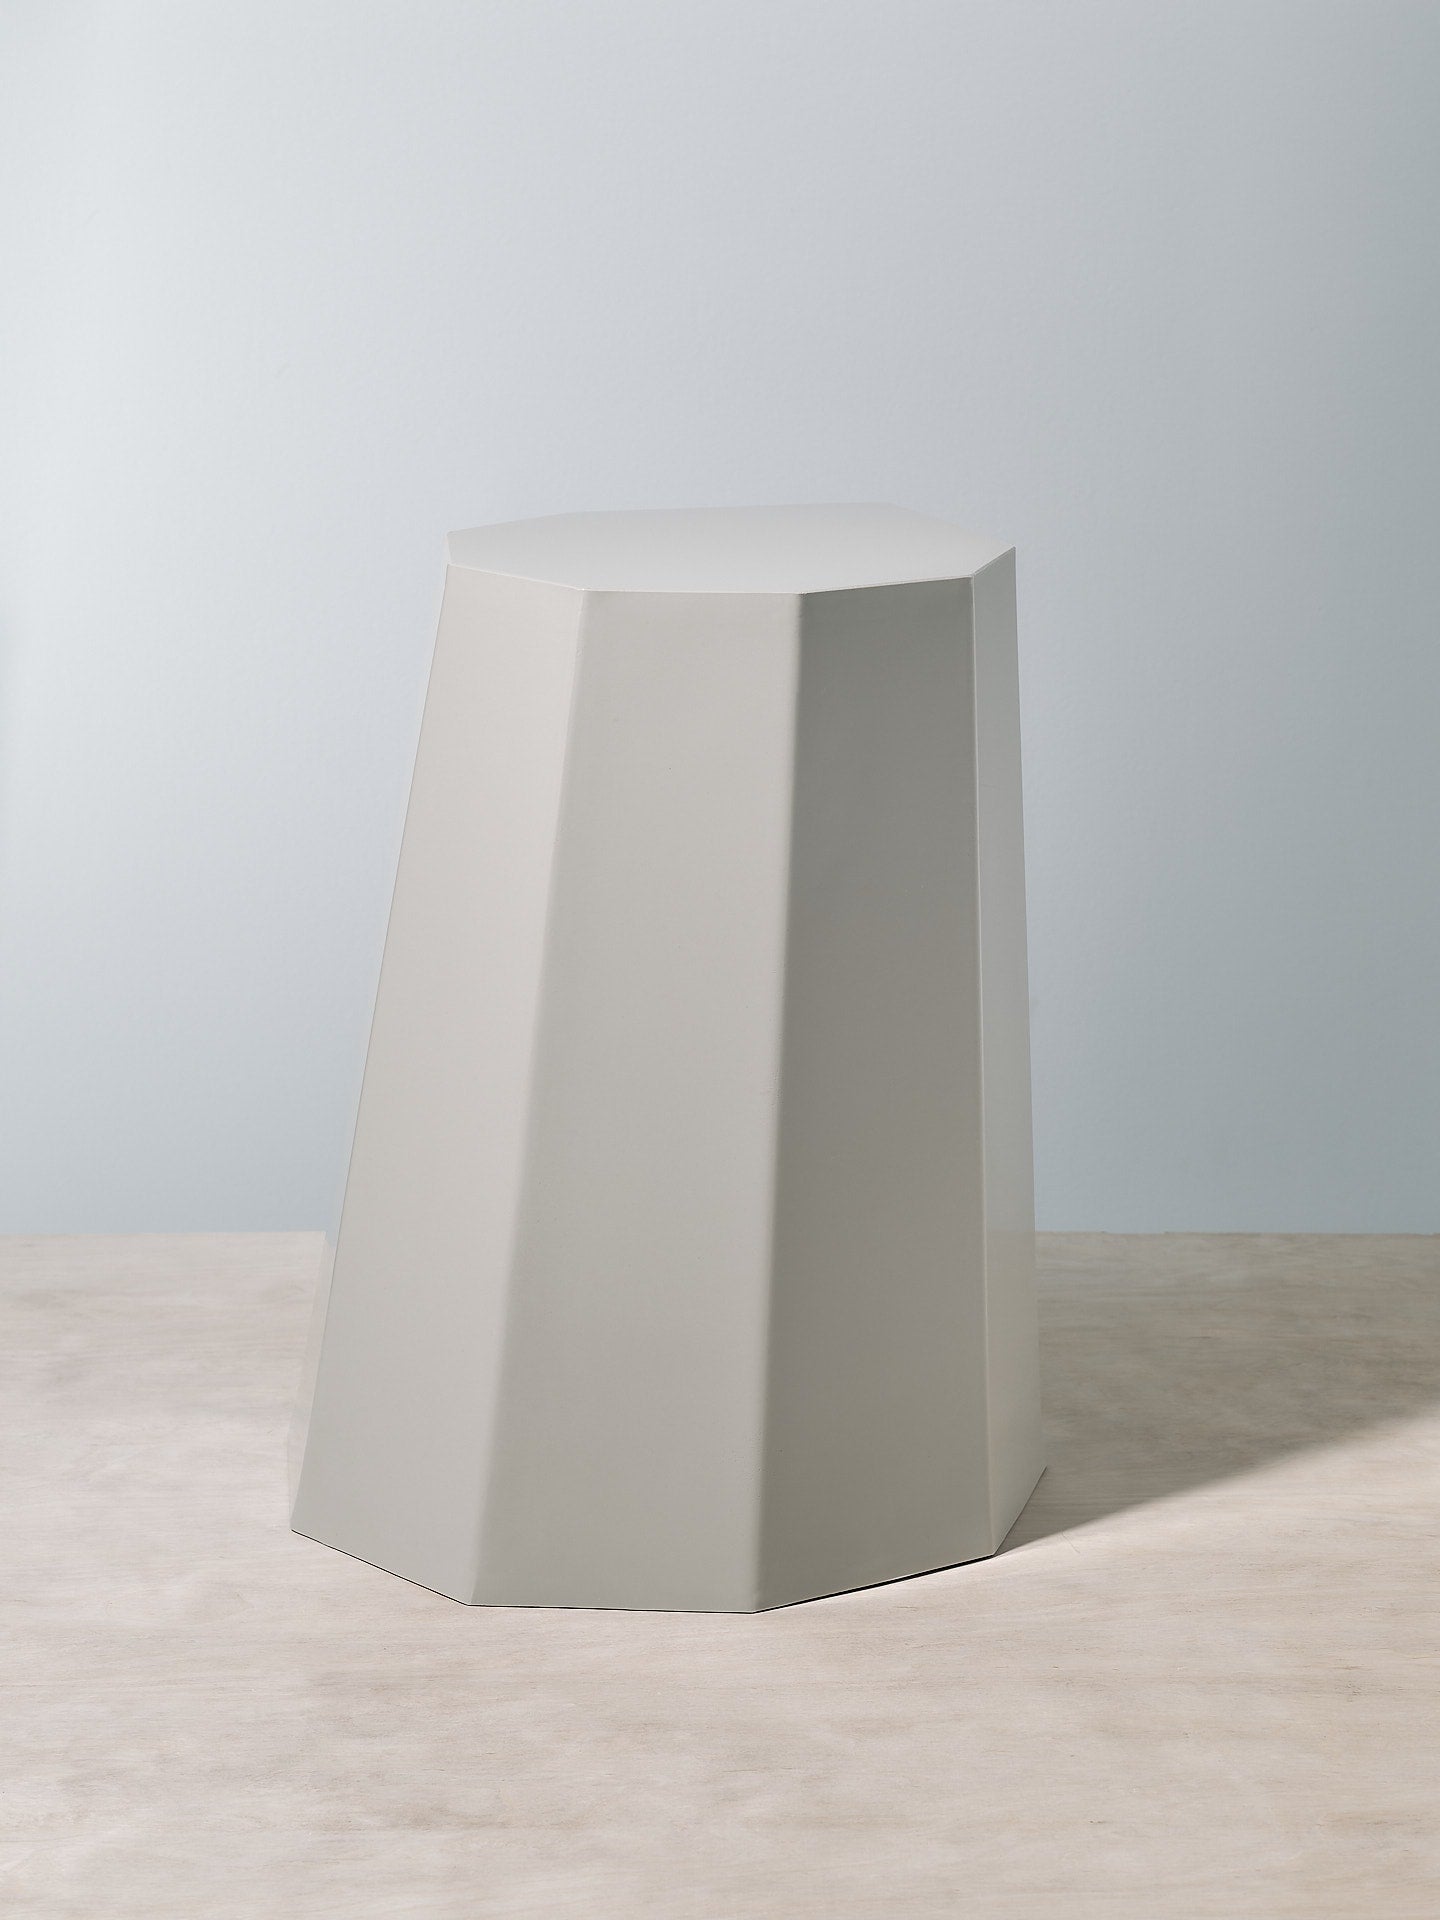 A grey Arnold Circus Stool – Cloud from the Martino Gamper brand with an octagonal shape.